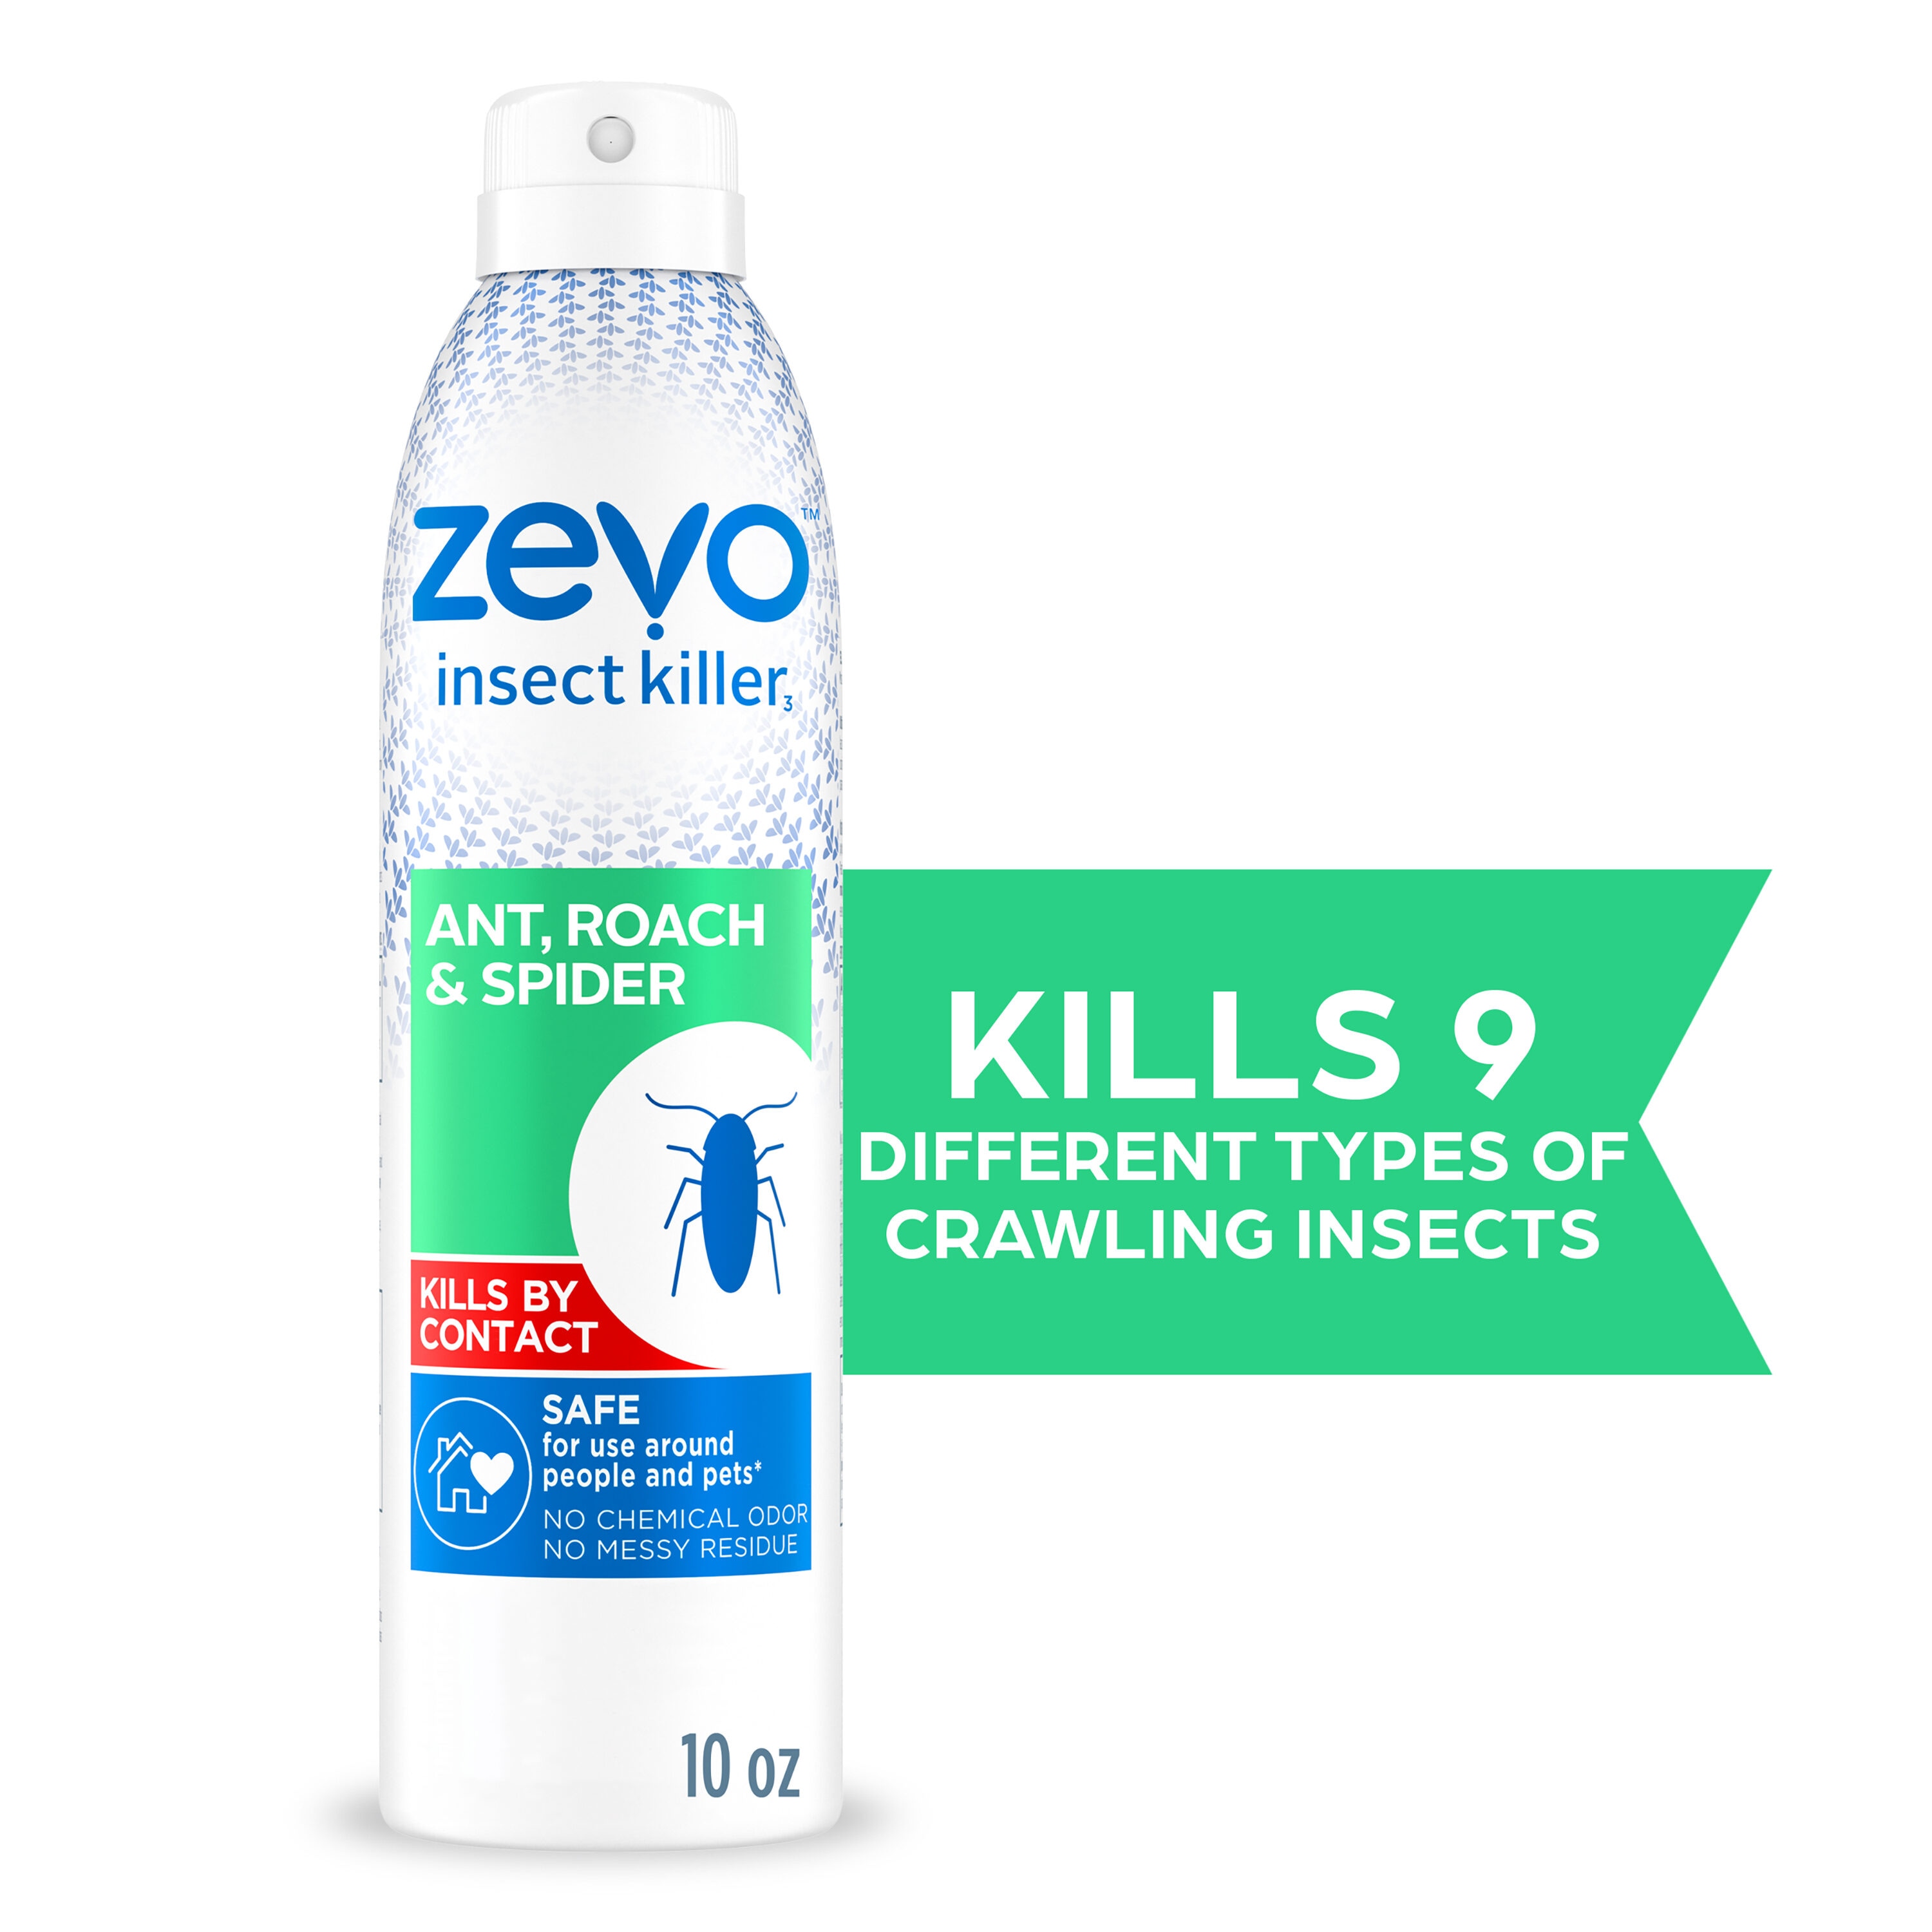 Zevo Flying Insect Trap Refill Cartridges (4-Pack) for Moths